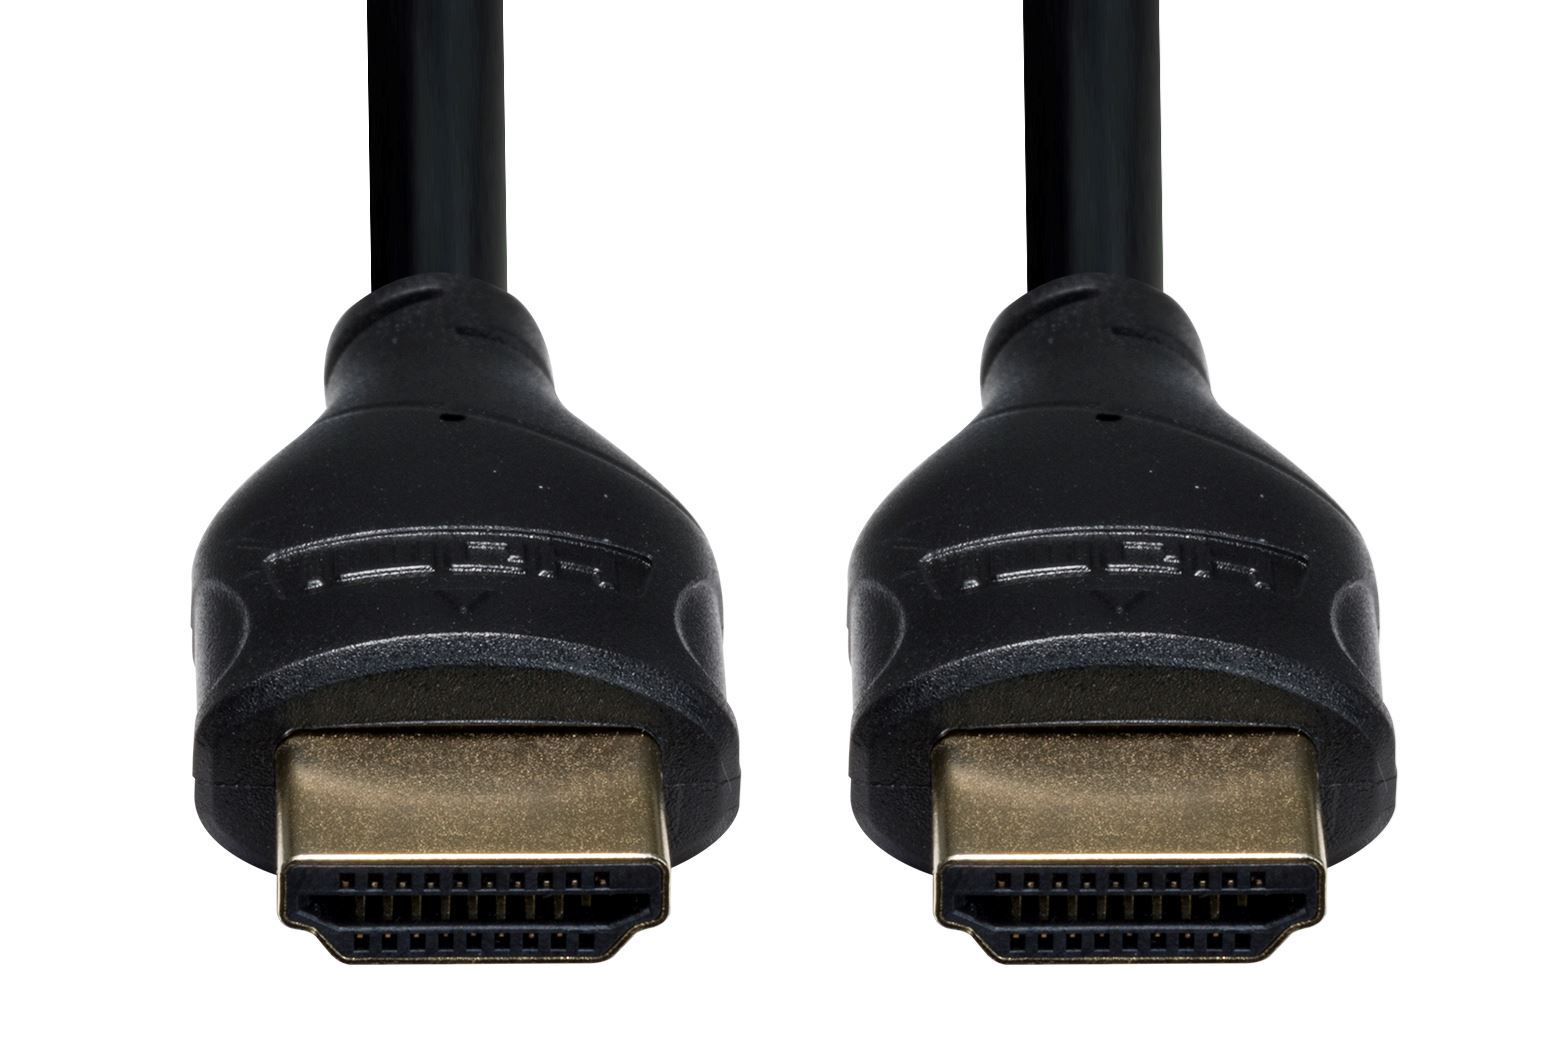 DYNAMIX_3m_HDMI_10Gbs_Slimline_High-Speed_Cable_with_Ethernet._Max_Res:_4K2K@24/30Hz_(3840x2160)_8_Audio_channels._8bit_colour_depth._Supports_CEC,_3D,_ARC,_Ethernet. 878